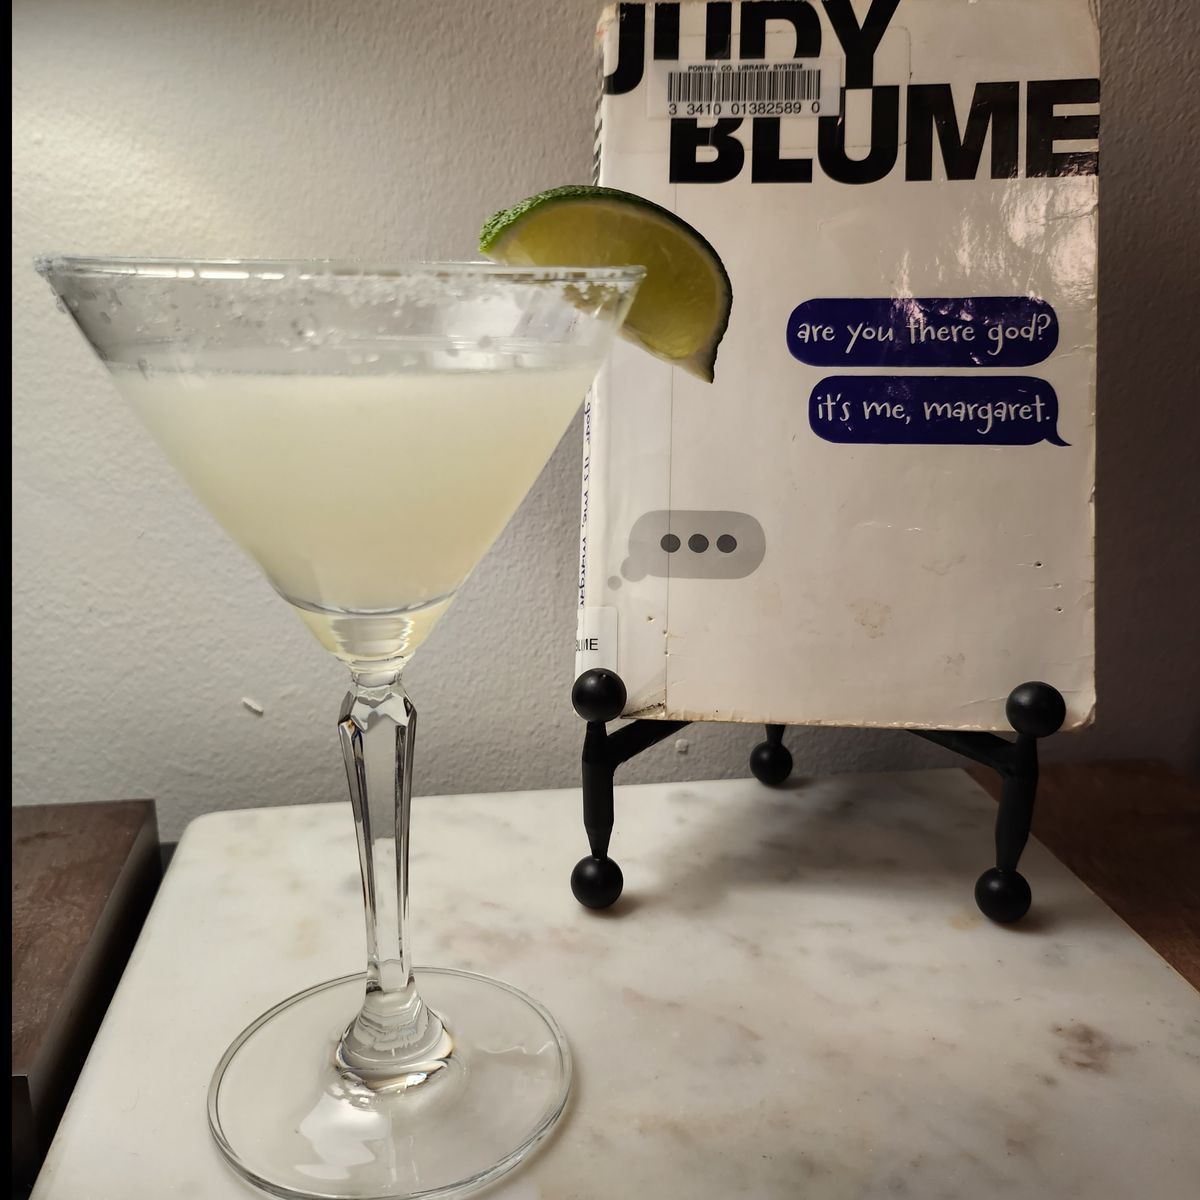 A mezcal margarita inspired by Judy Blume's classic coming-of-age story, soon to be a major motion picture more than 50 years after the book was published!